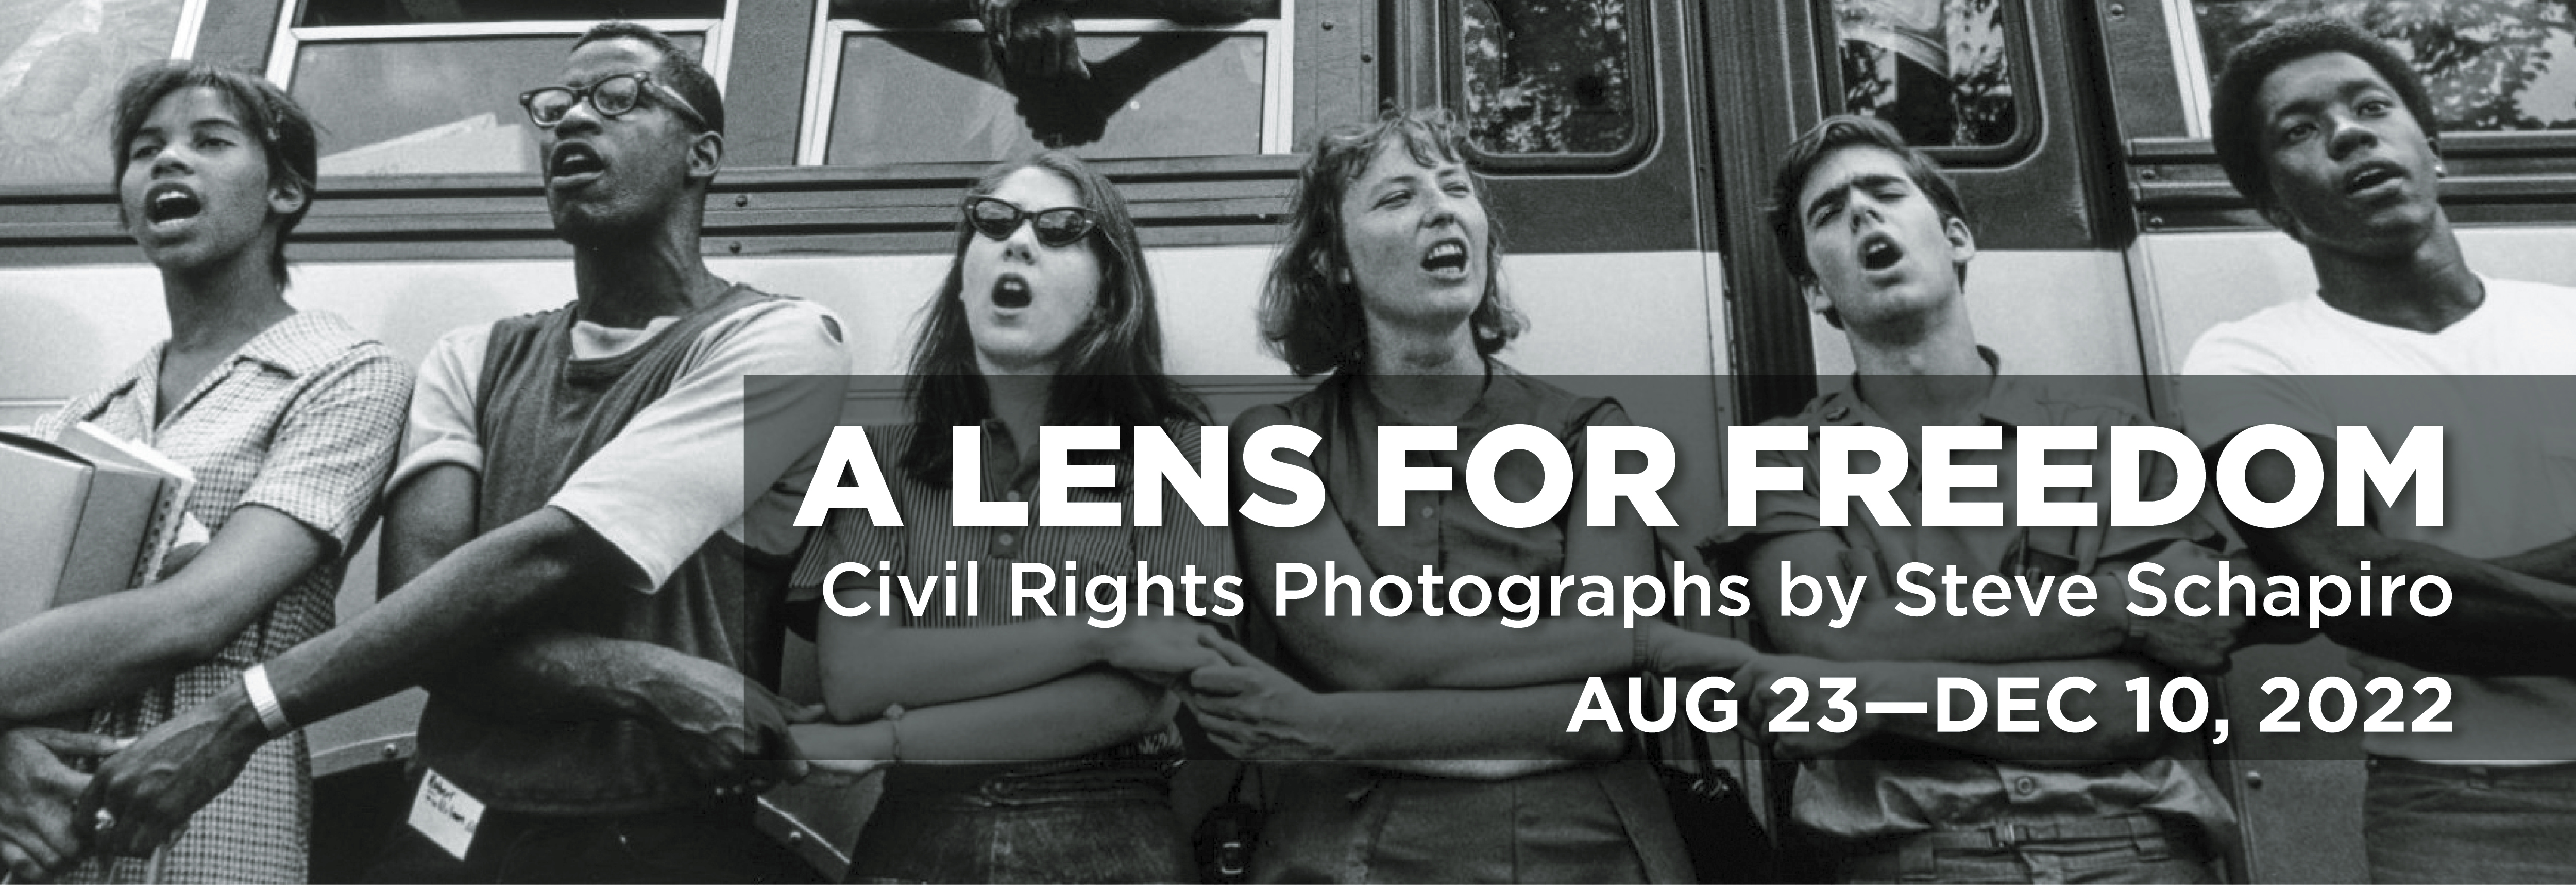  A Lens for Freedom exhibition open Aug 23-Dec 10